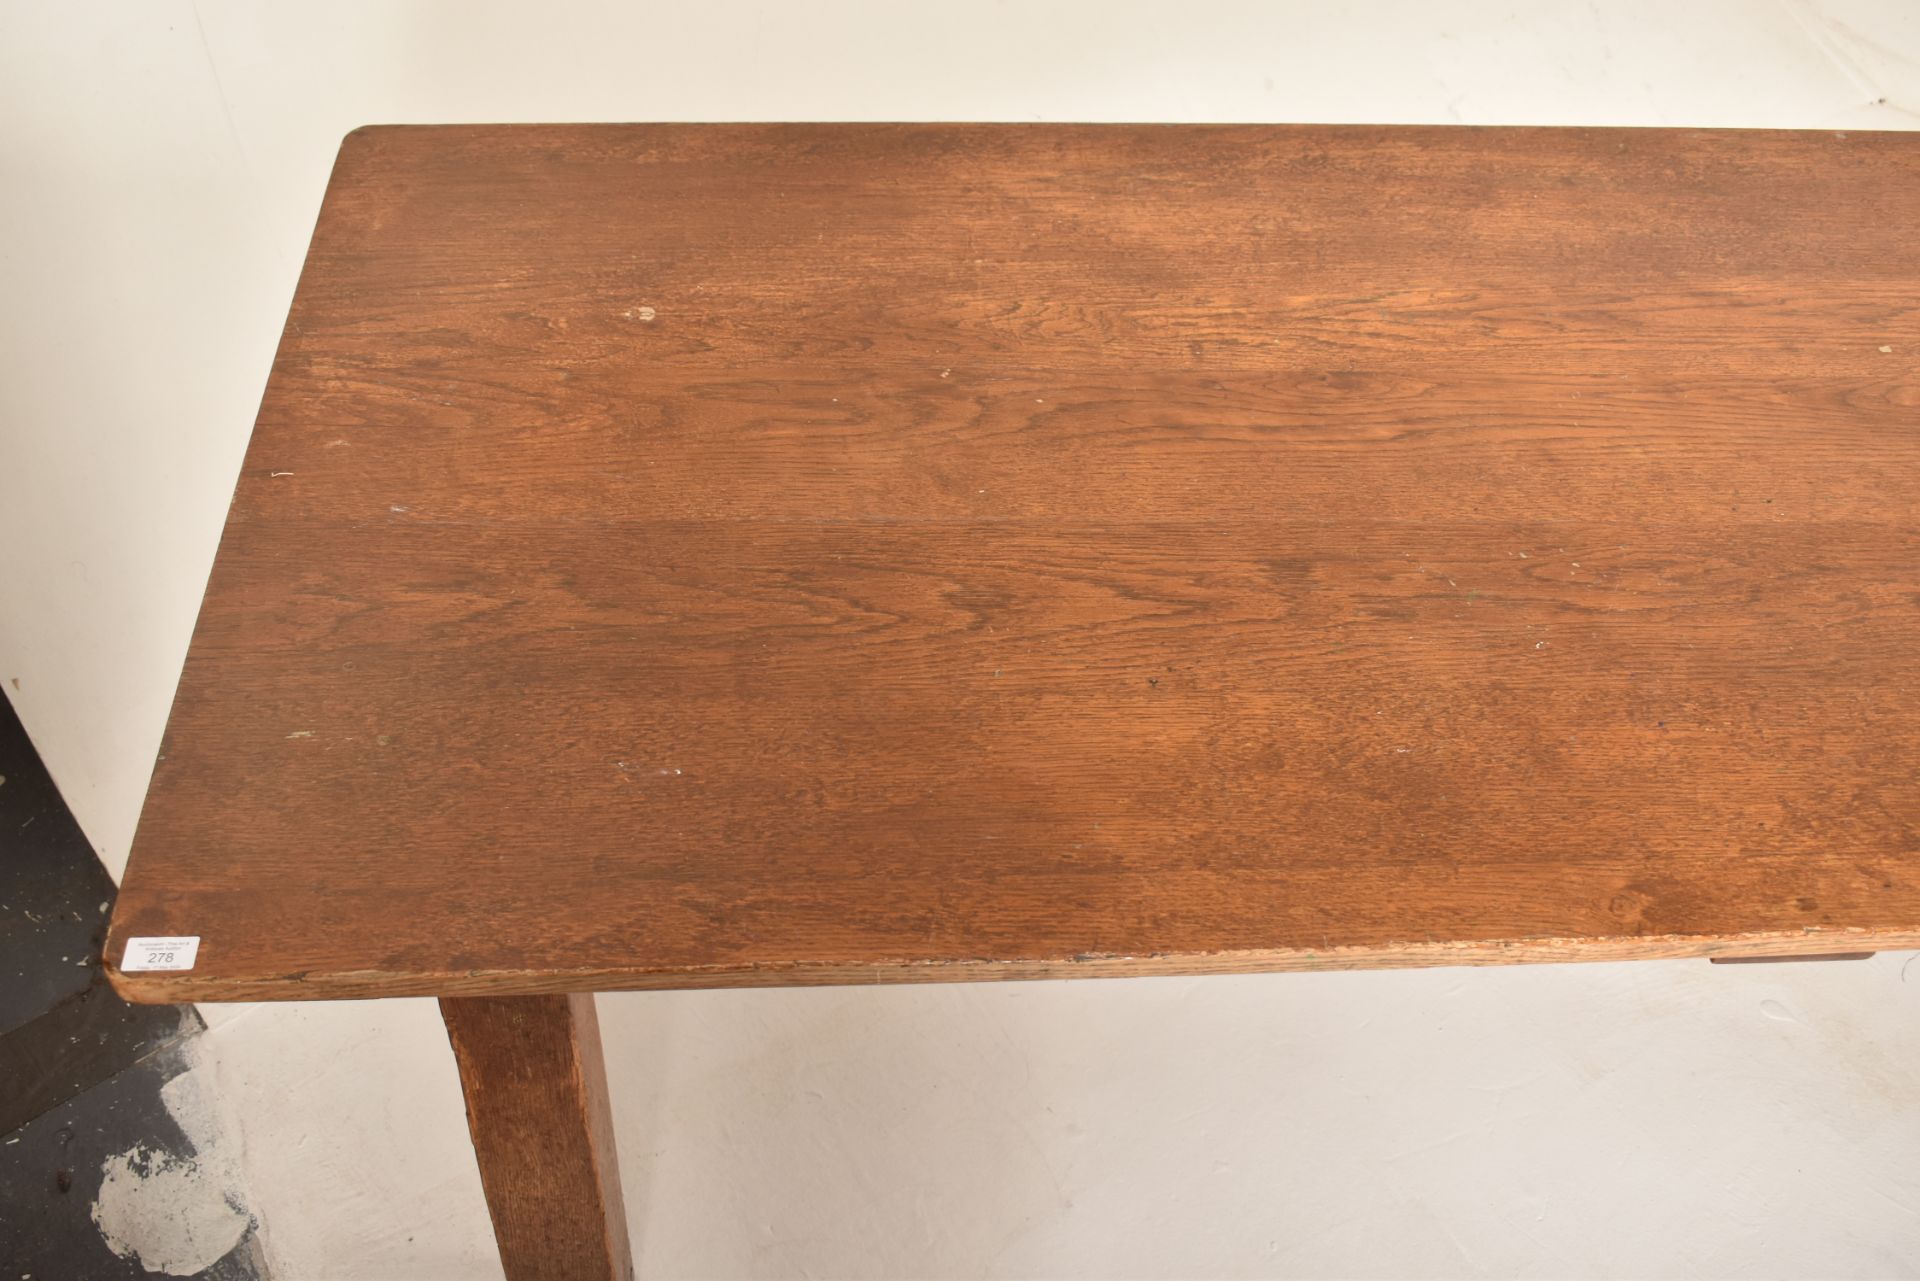 EARLY 20TH CENTURY ELM WOOD PLANK TOP REFECTORY TABLE - Image 5 of 6